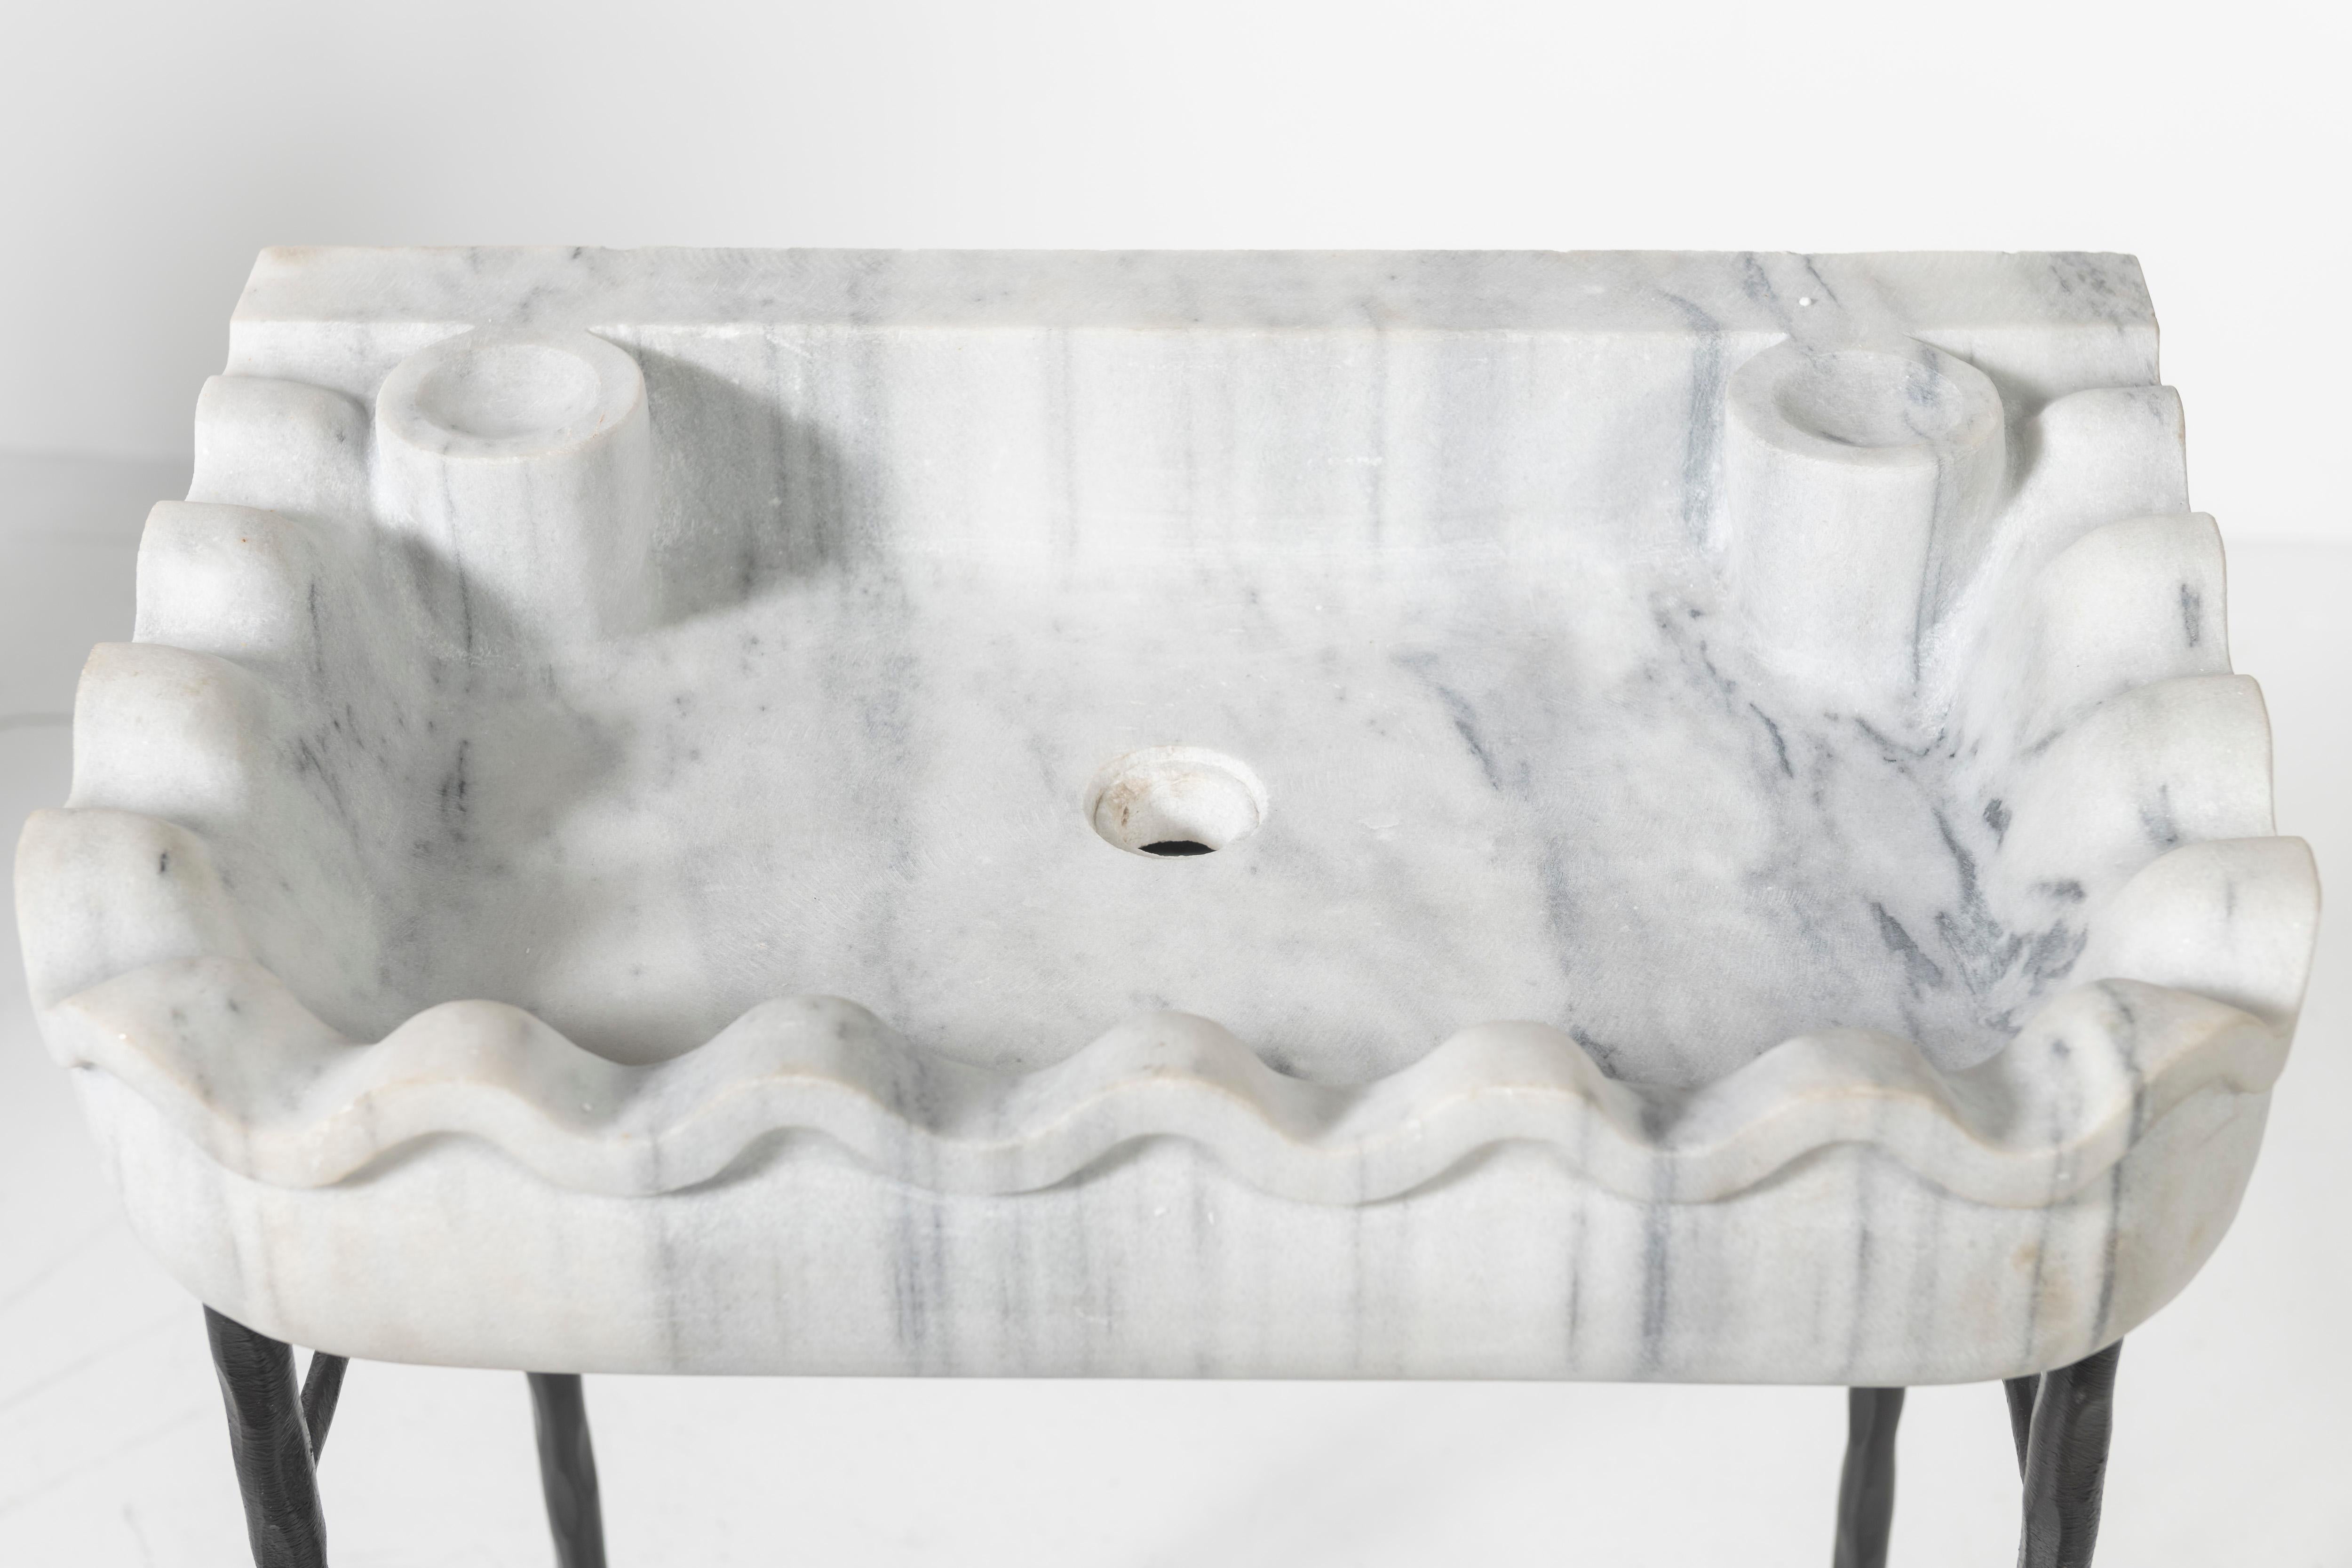 Classical Roman Antique Italian Carrera Marble Sink Basin with Hand Forged Iron Stand